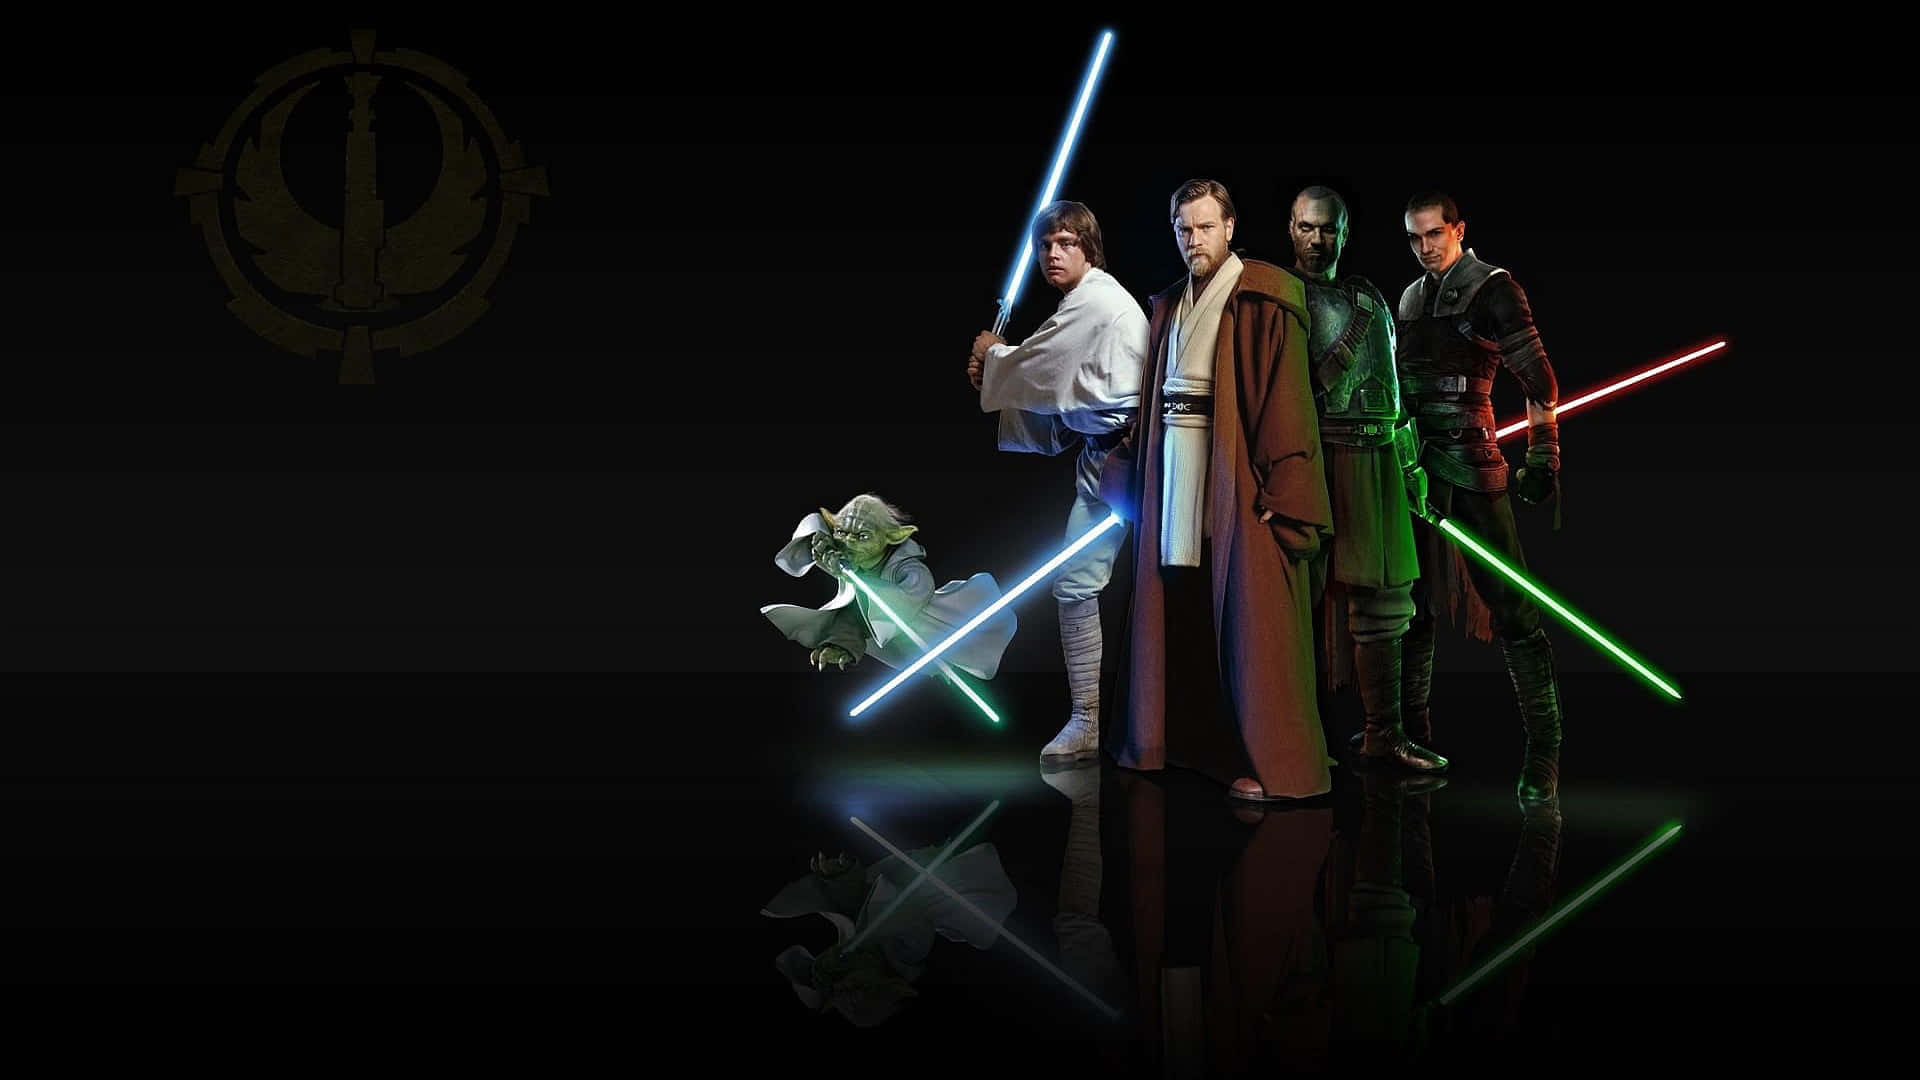 A gathering of wisdom in the Galactic Republic - Jedi Council Meeting Wallpaper